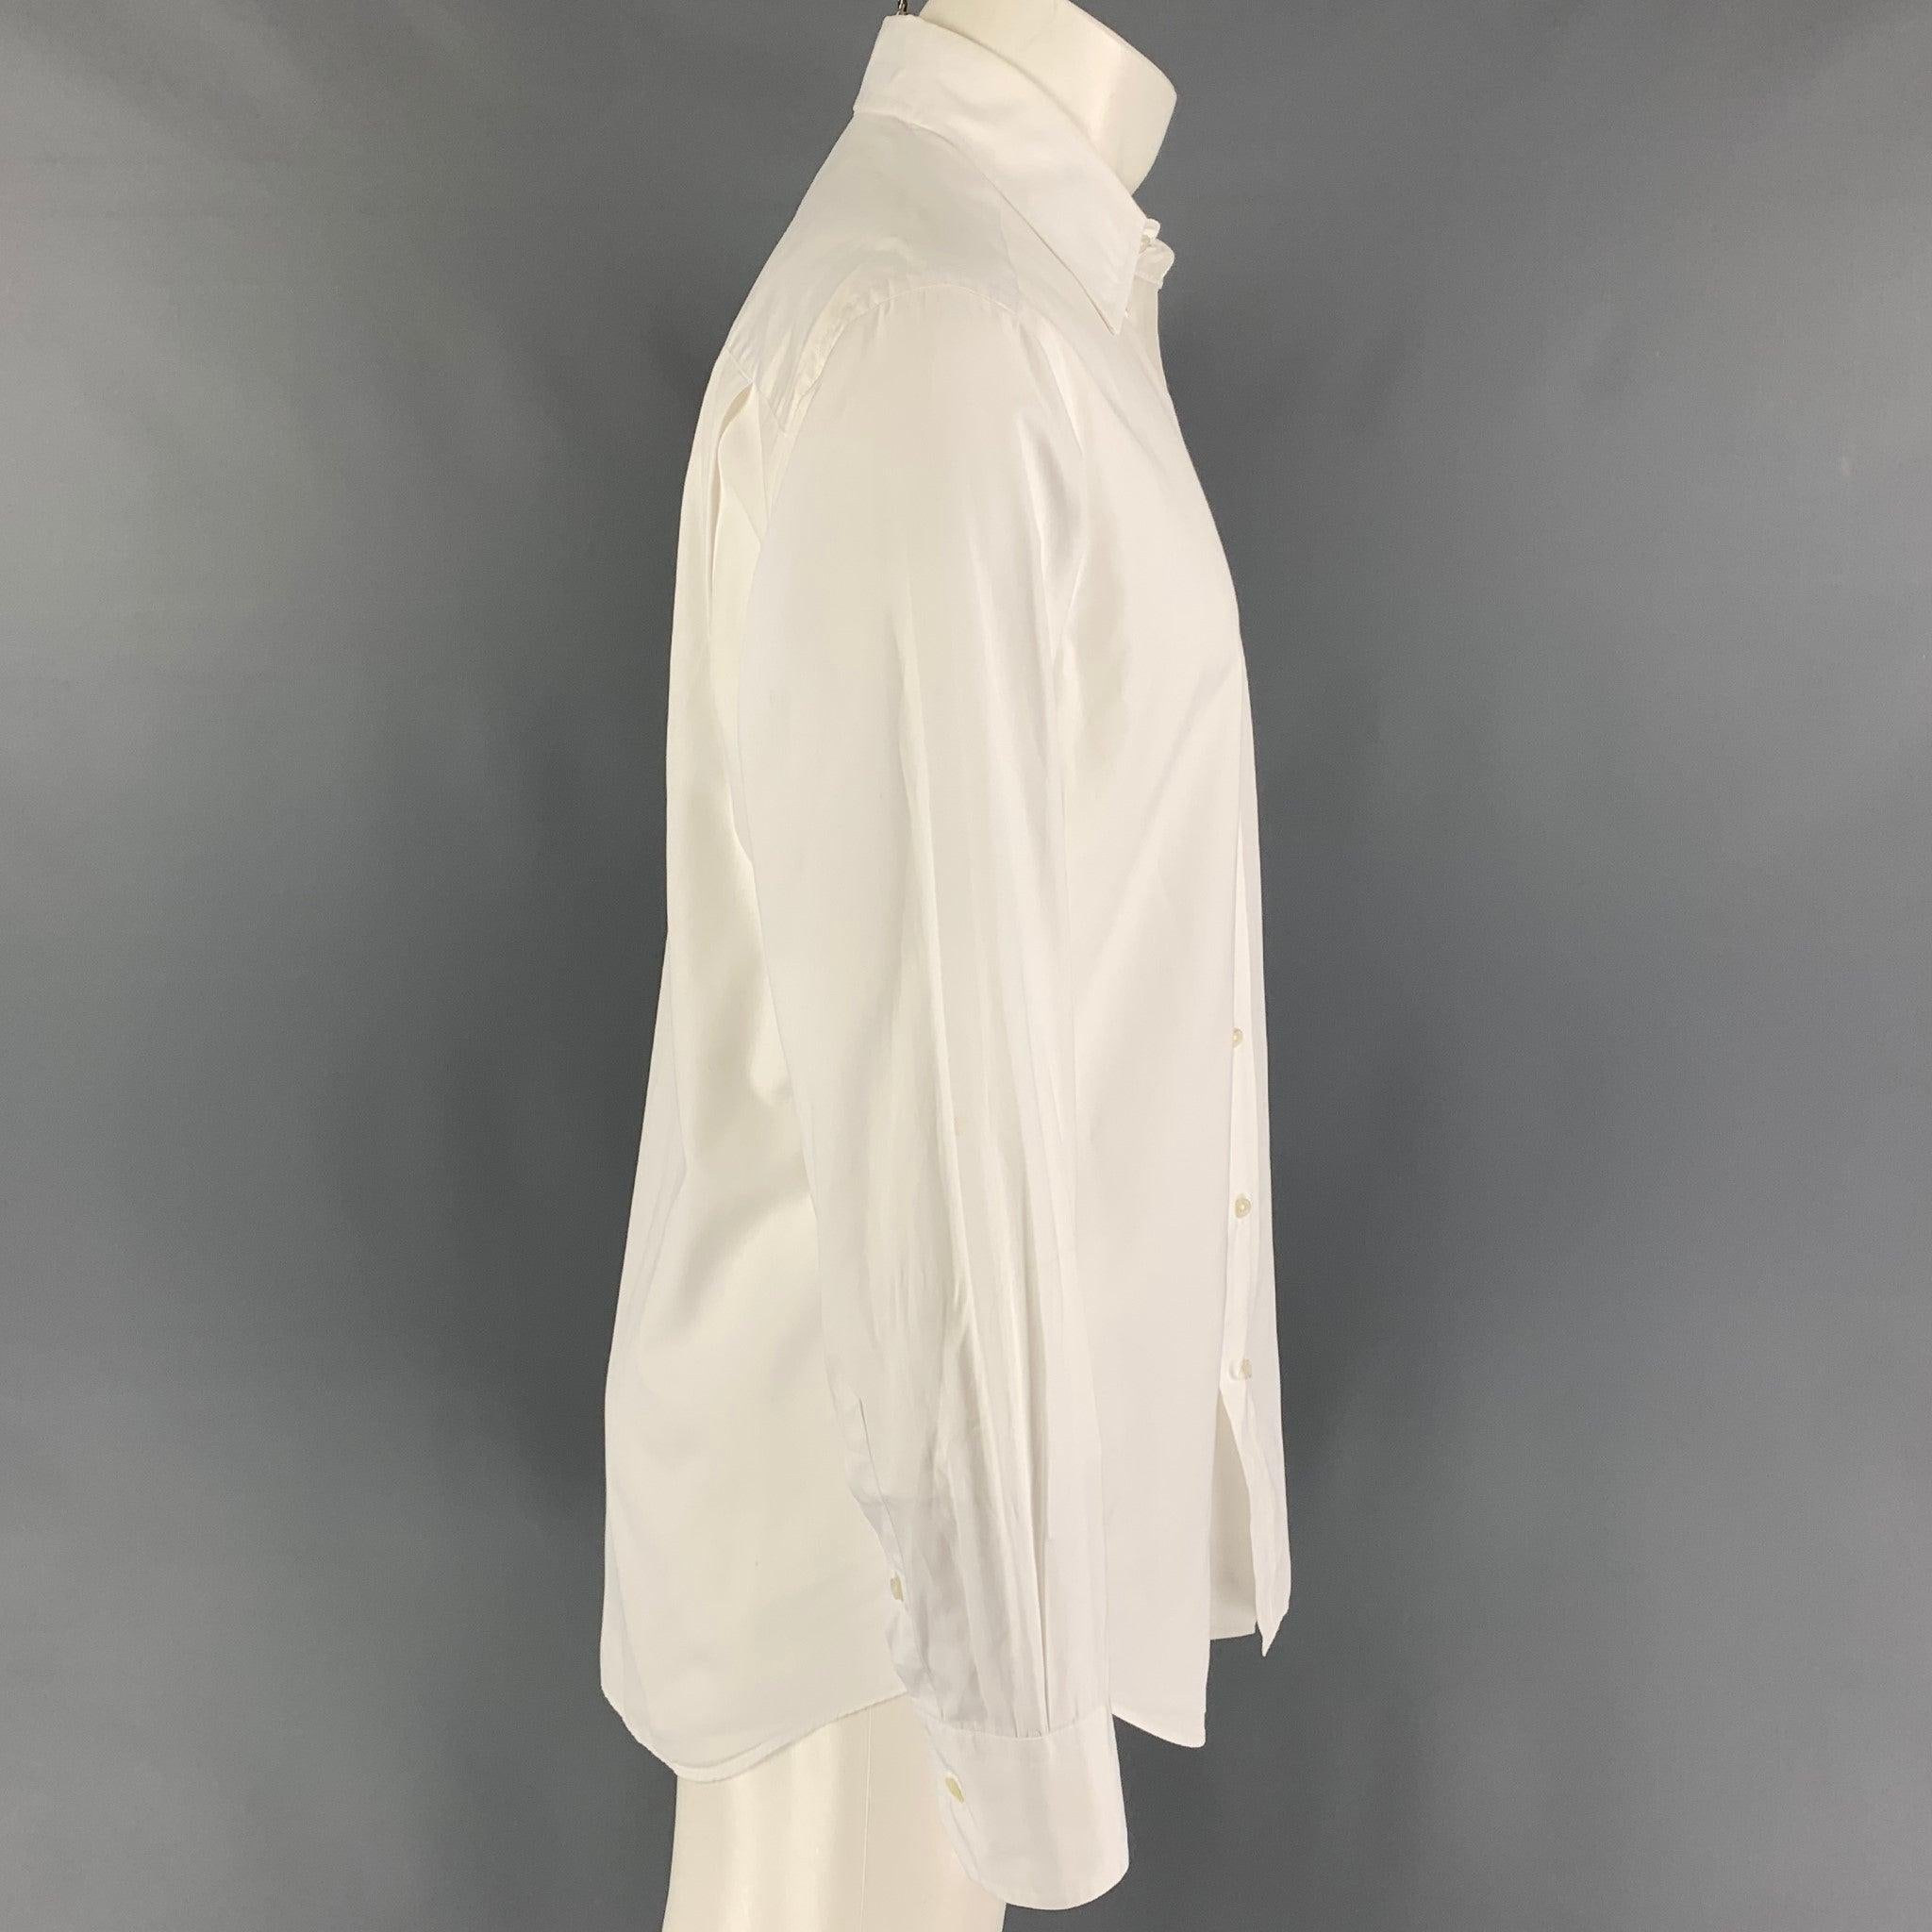 GIORGIO ARMANI long sleeve shirt comes in a white cotton featuring a classic style, spread collar, patch pocket, and a button up closure. Made in Italy.
Good Pre-Owned Condition. Light discoloration at back & sleeve. As-is.  

Marked:   39/15.5